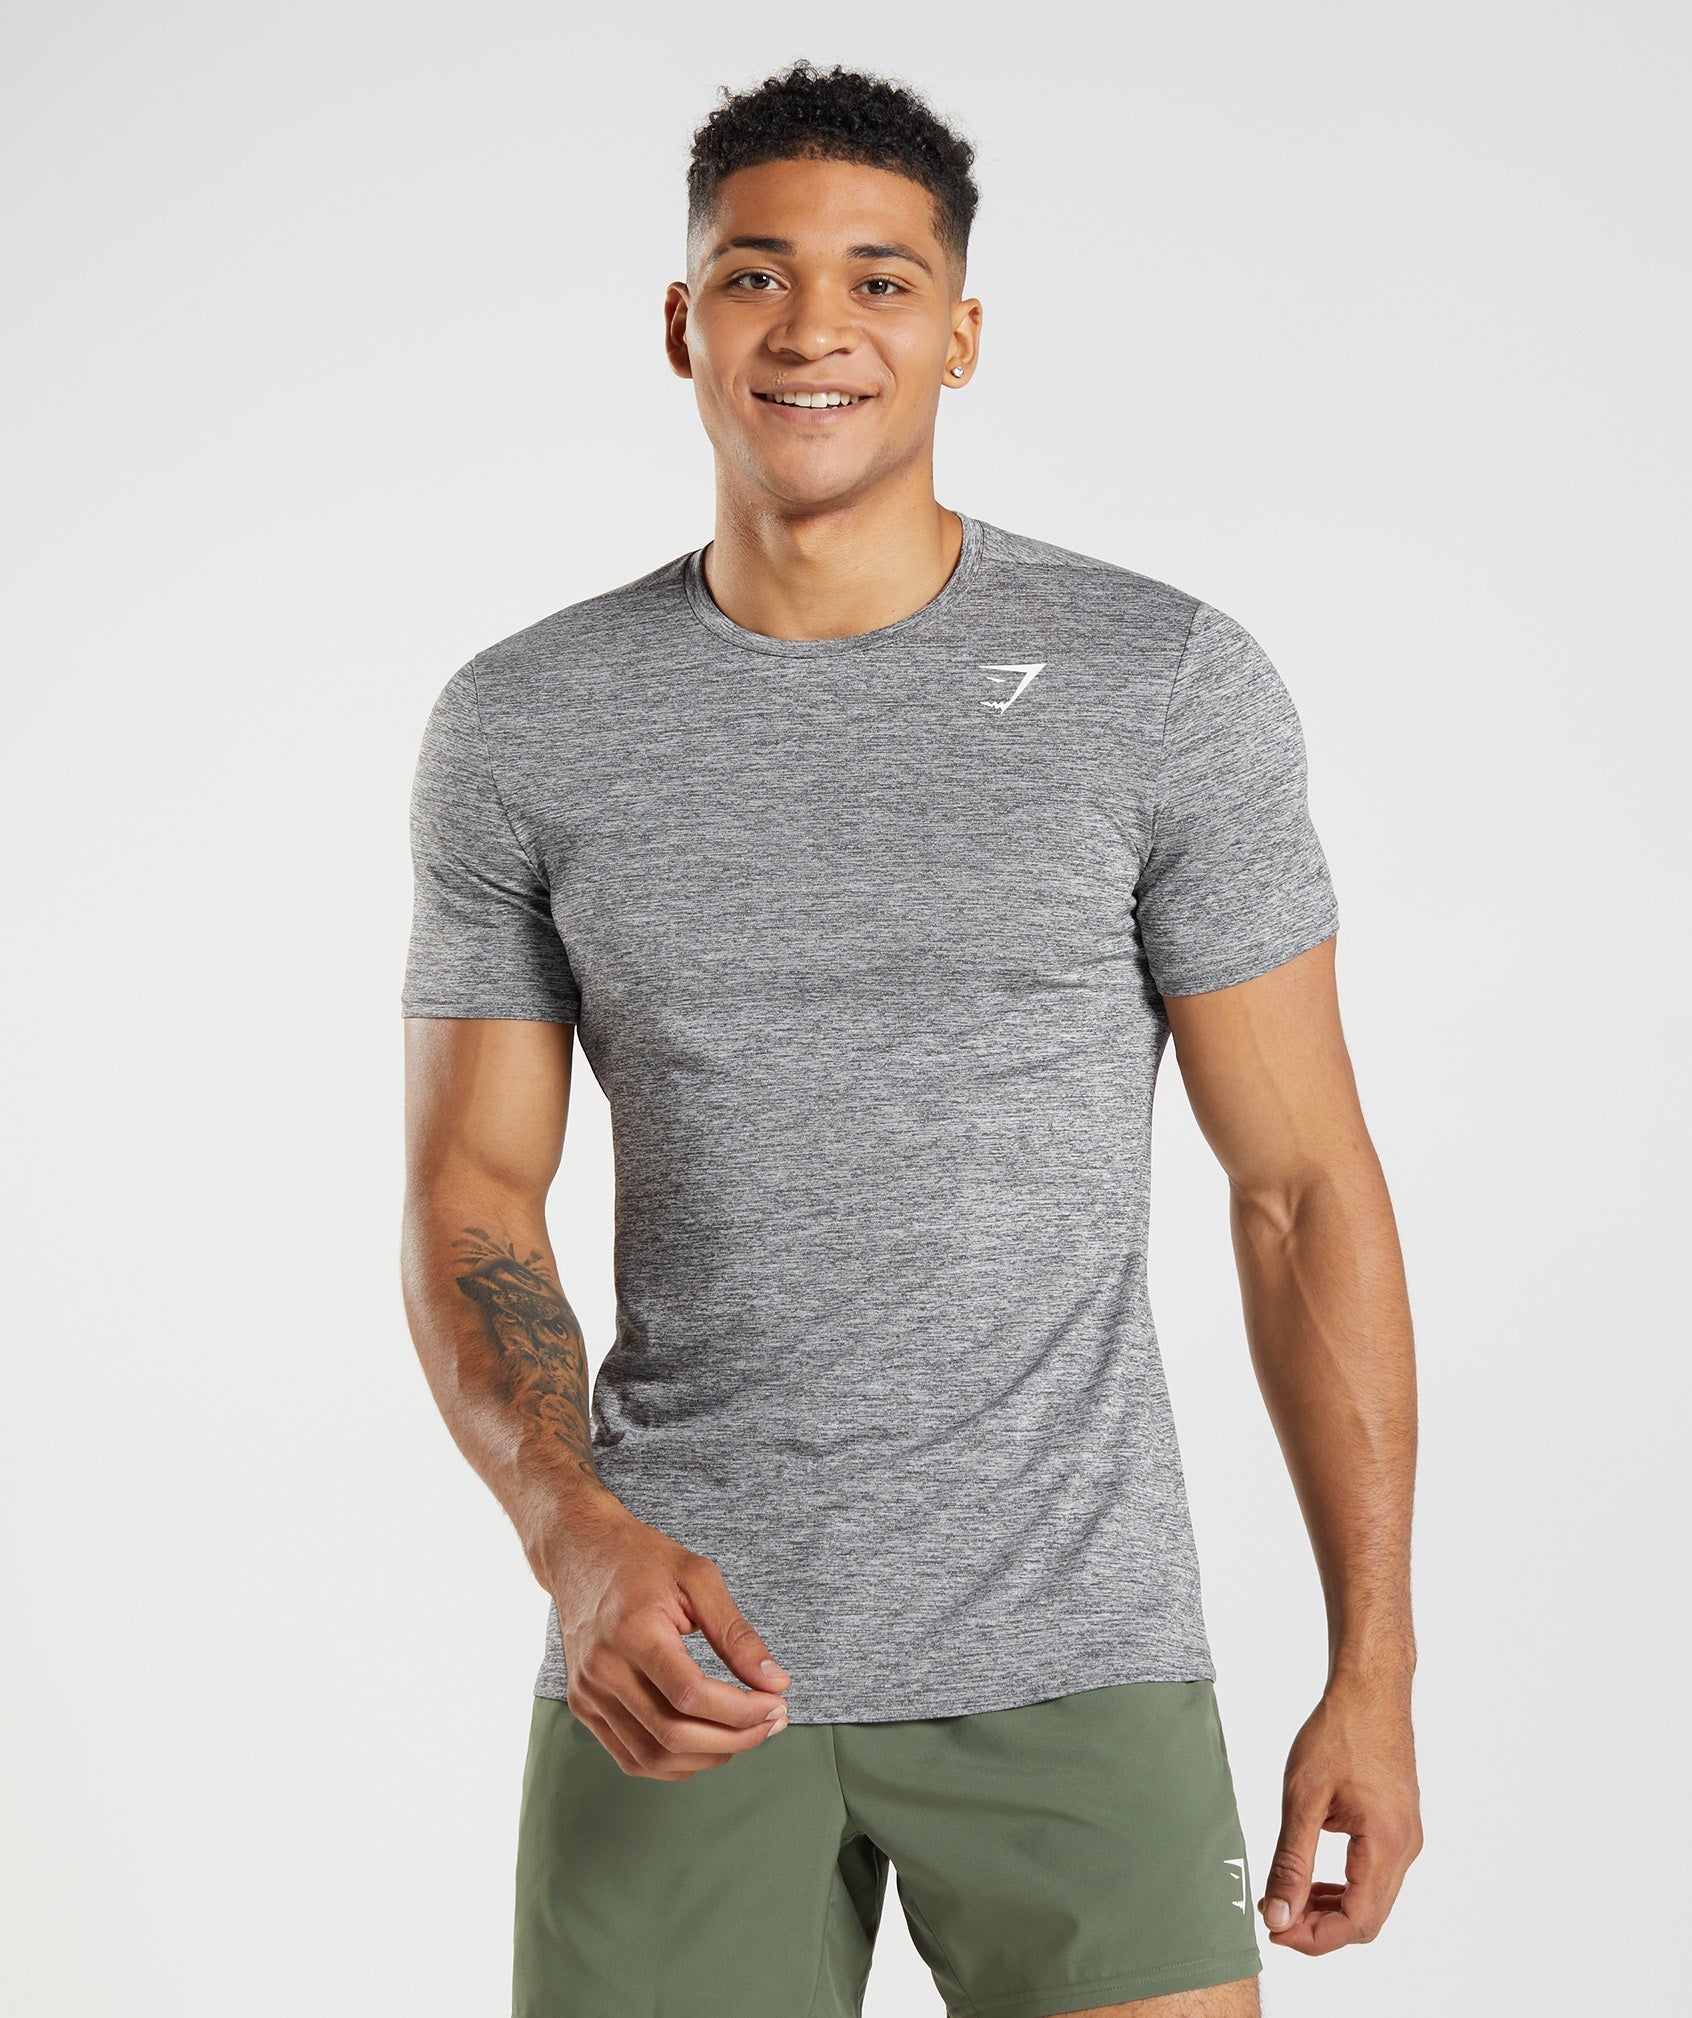 Indispensables, Gym & Fitness Clothing